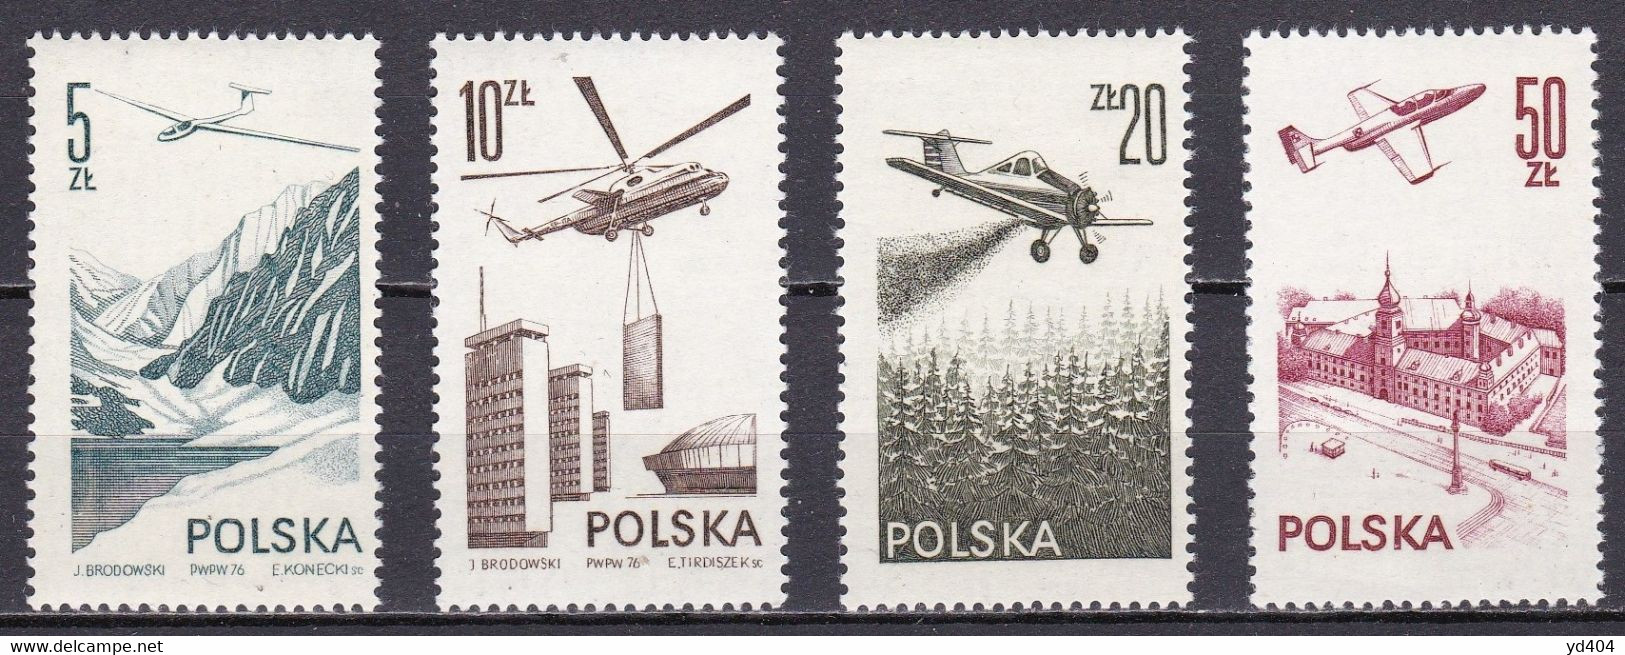 PL325 – POLAND – AIRMAIL – 1976-78 – CONTEMPORARY AVIATION - Y&T # 55/8 MNH 11 € - Unused Stamps